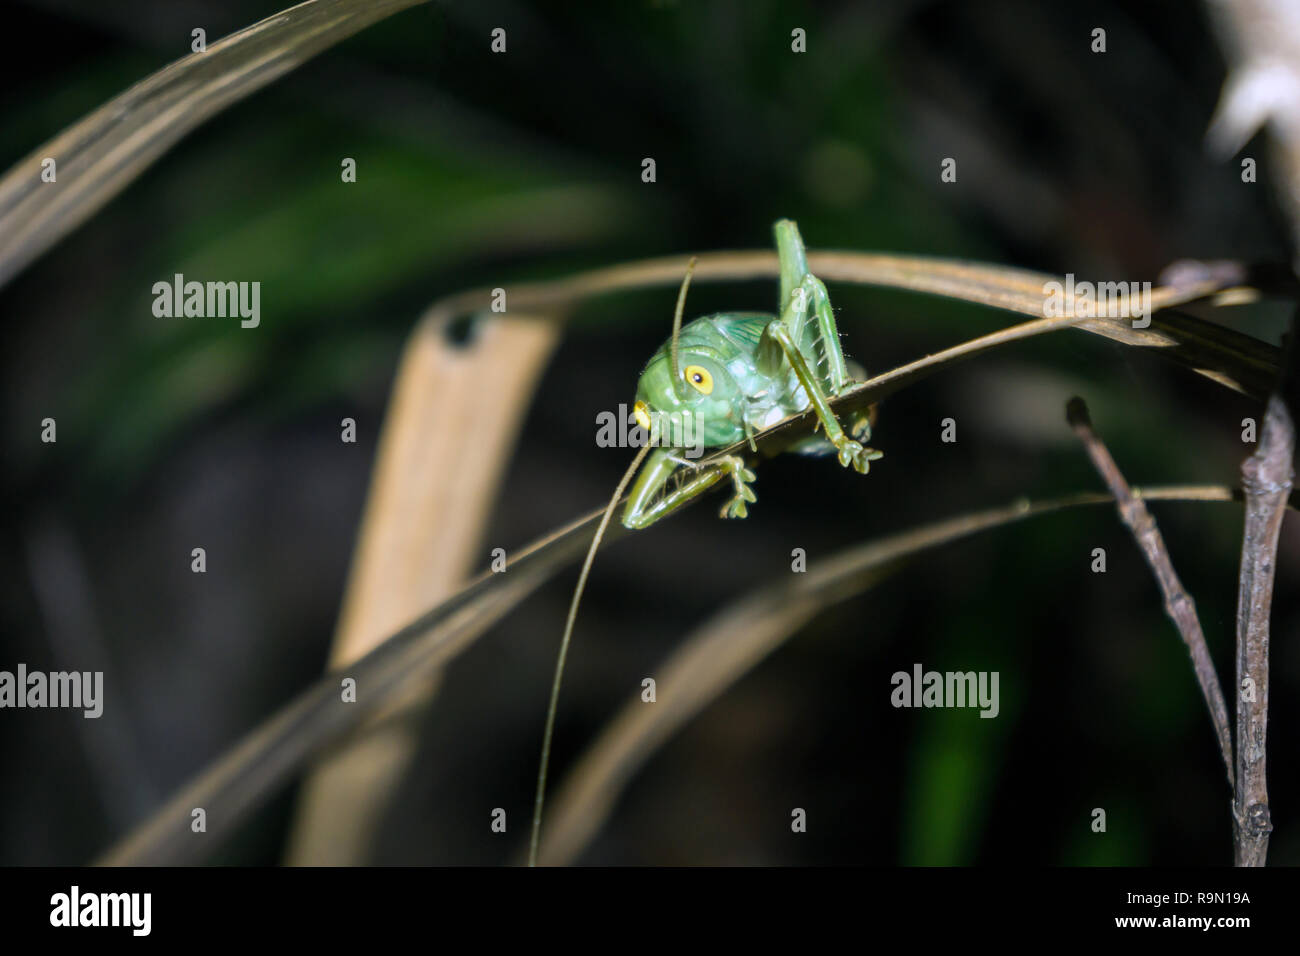 Green Katydid (Cricket or Grasshopper) with Yellow Eyes. Found at Night in Jungle of Krabi, Thailand Stock Photo